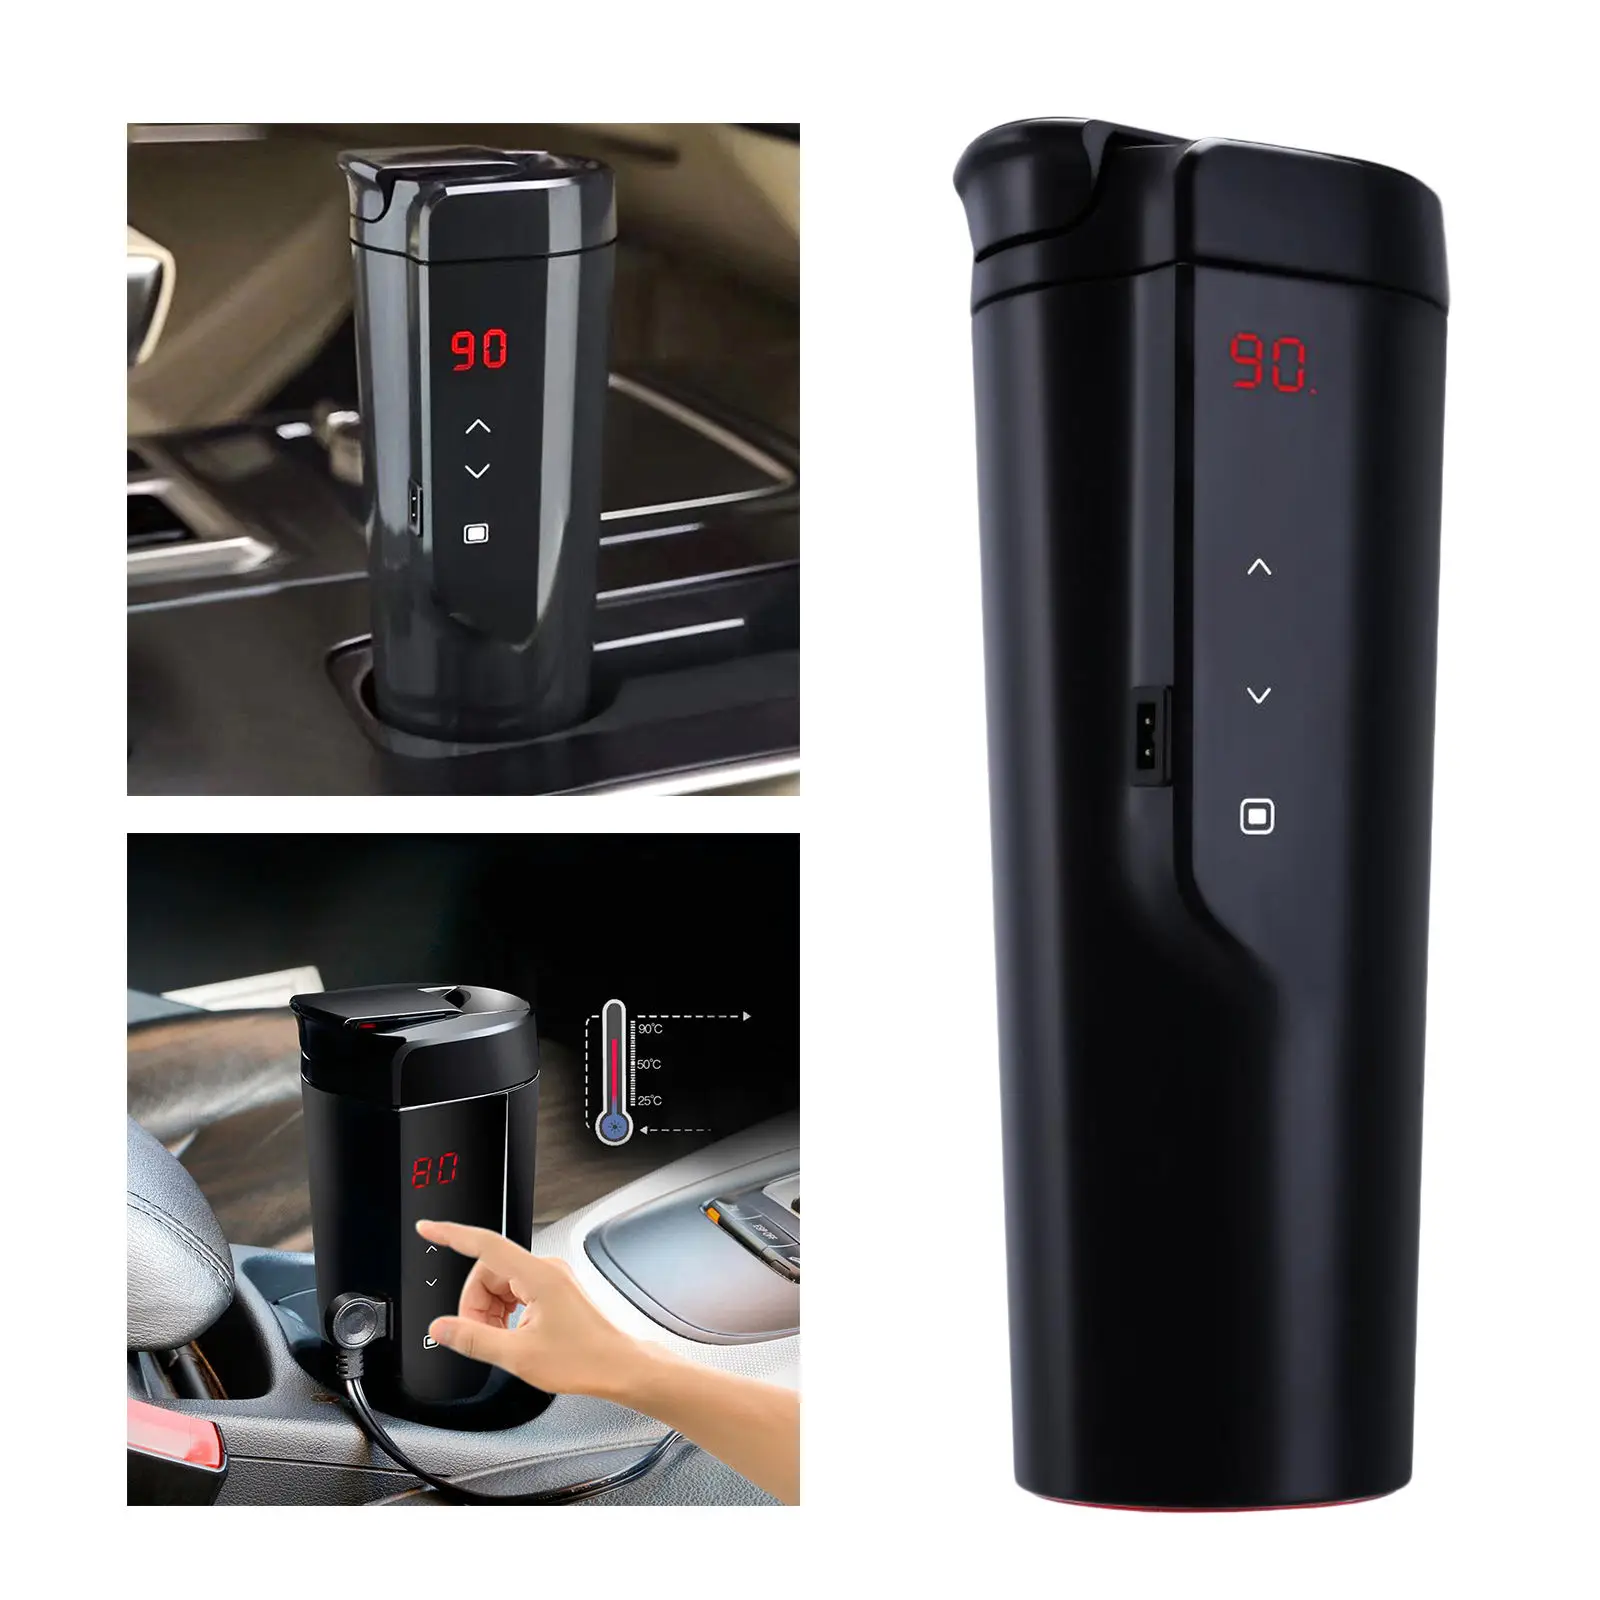 Intelligent Heated Travel Tea Mug 12V Electric Car Coffee Cup with Temperature Control, Real Time Display